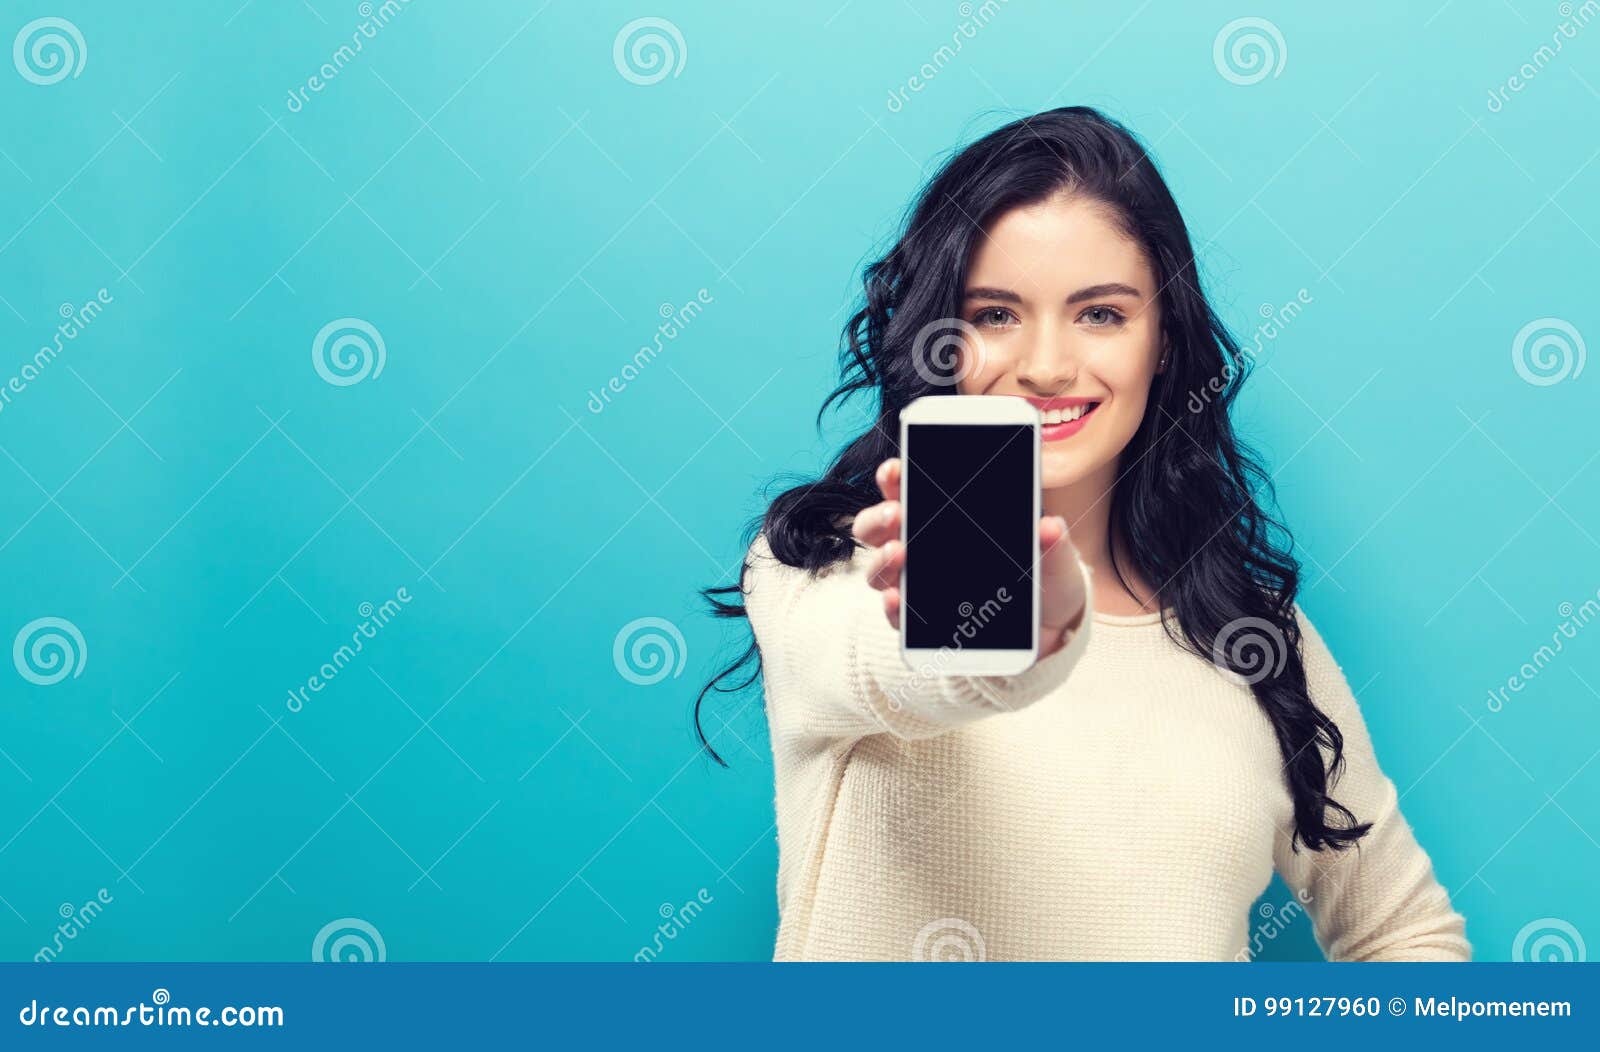 young woman holding out a cellphone